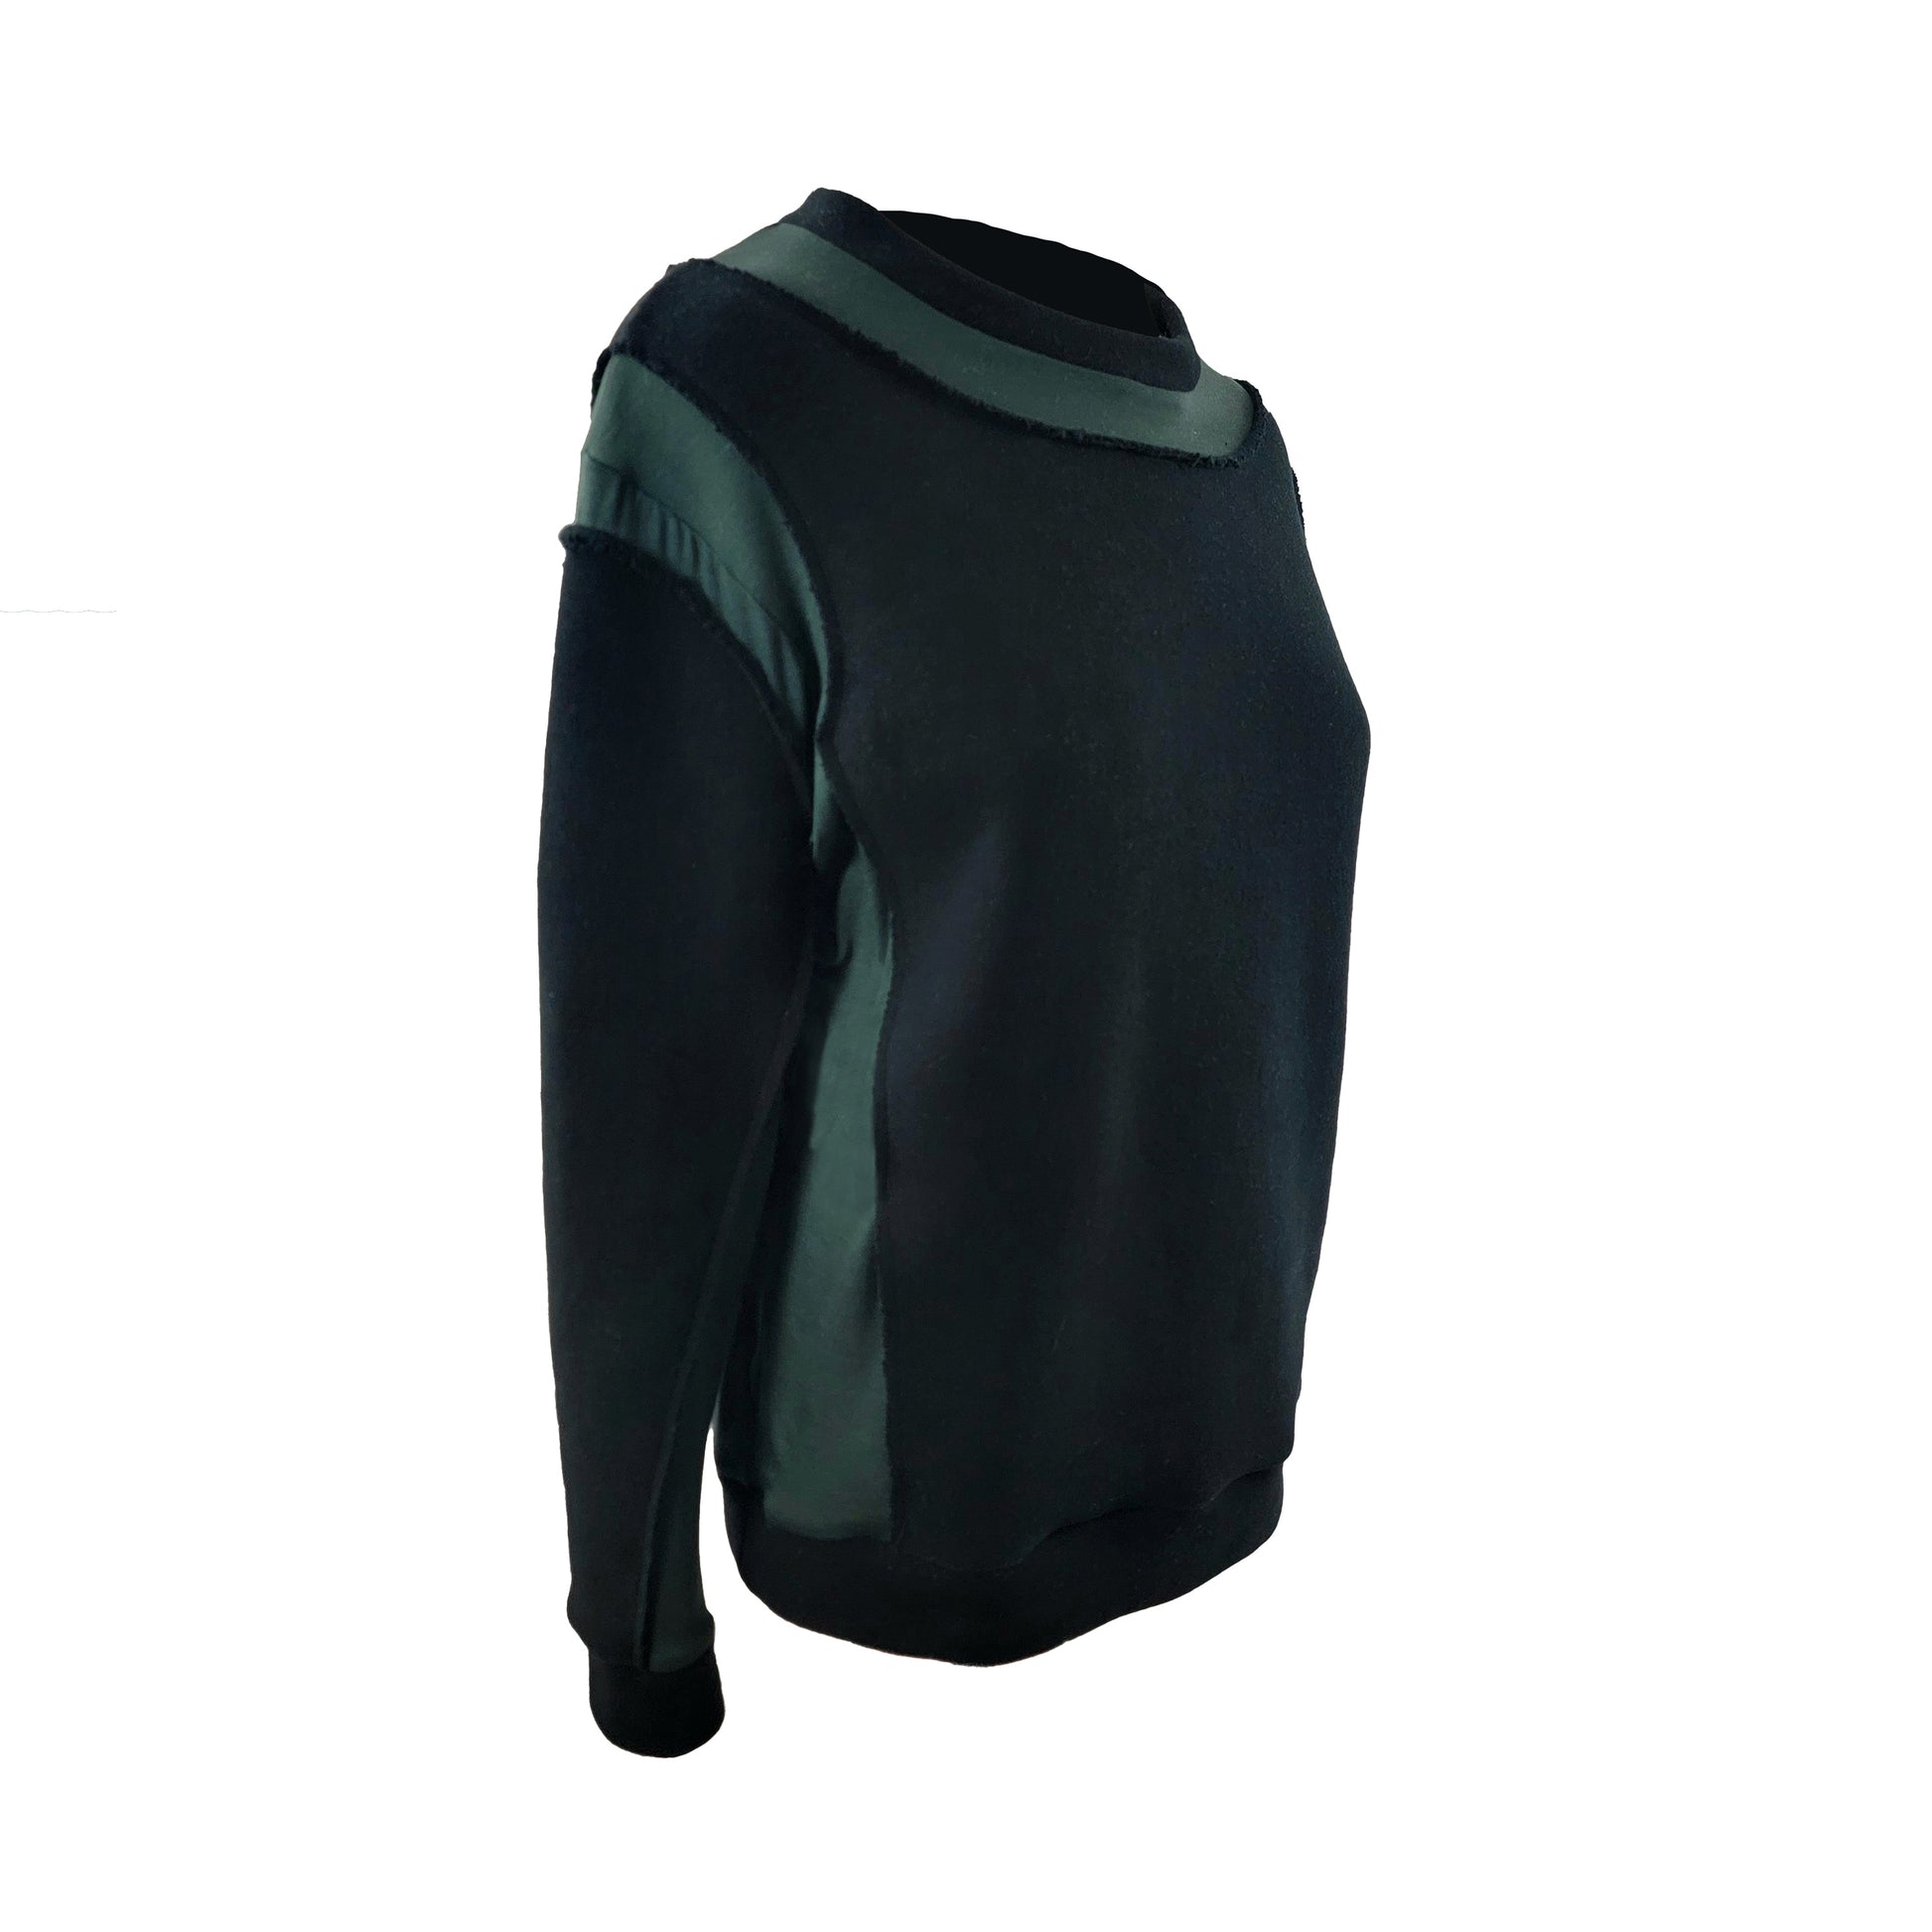 Jersey and Lyocell / cotton sweat shirt with incorporated front seam inset pocket in Black and Bottle Green turned to the right